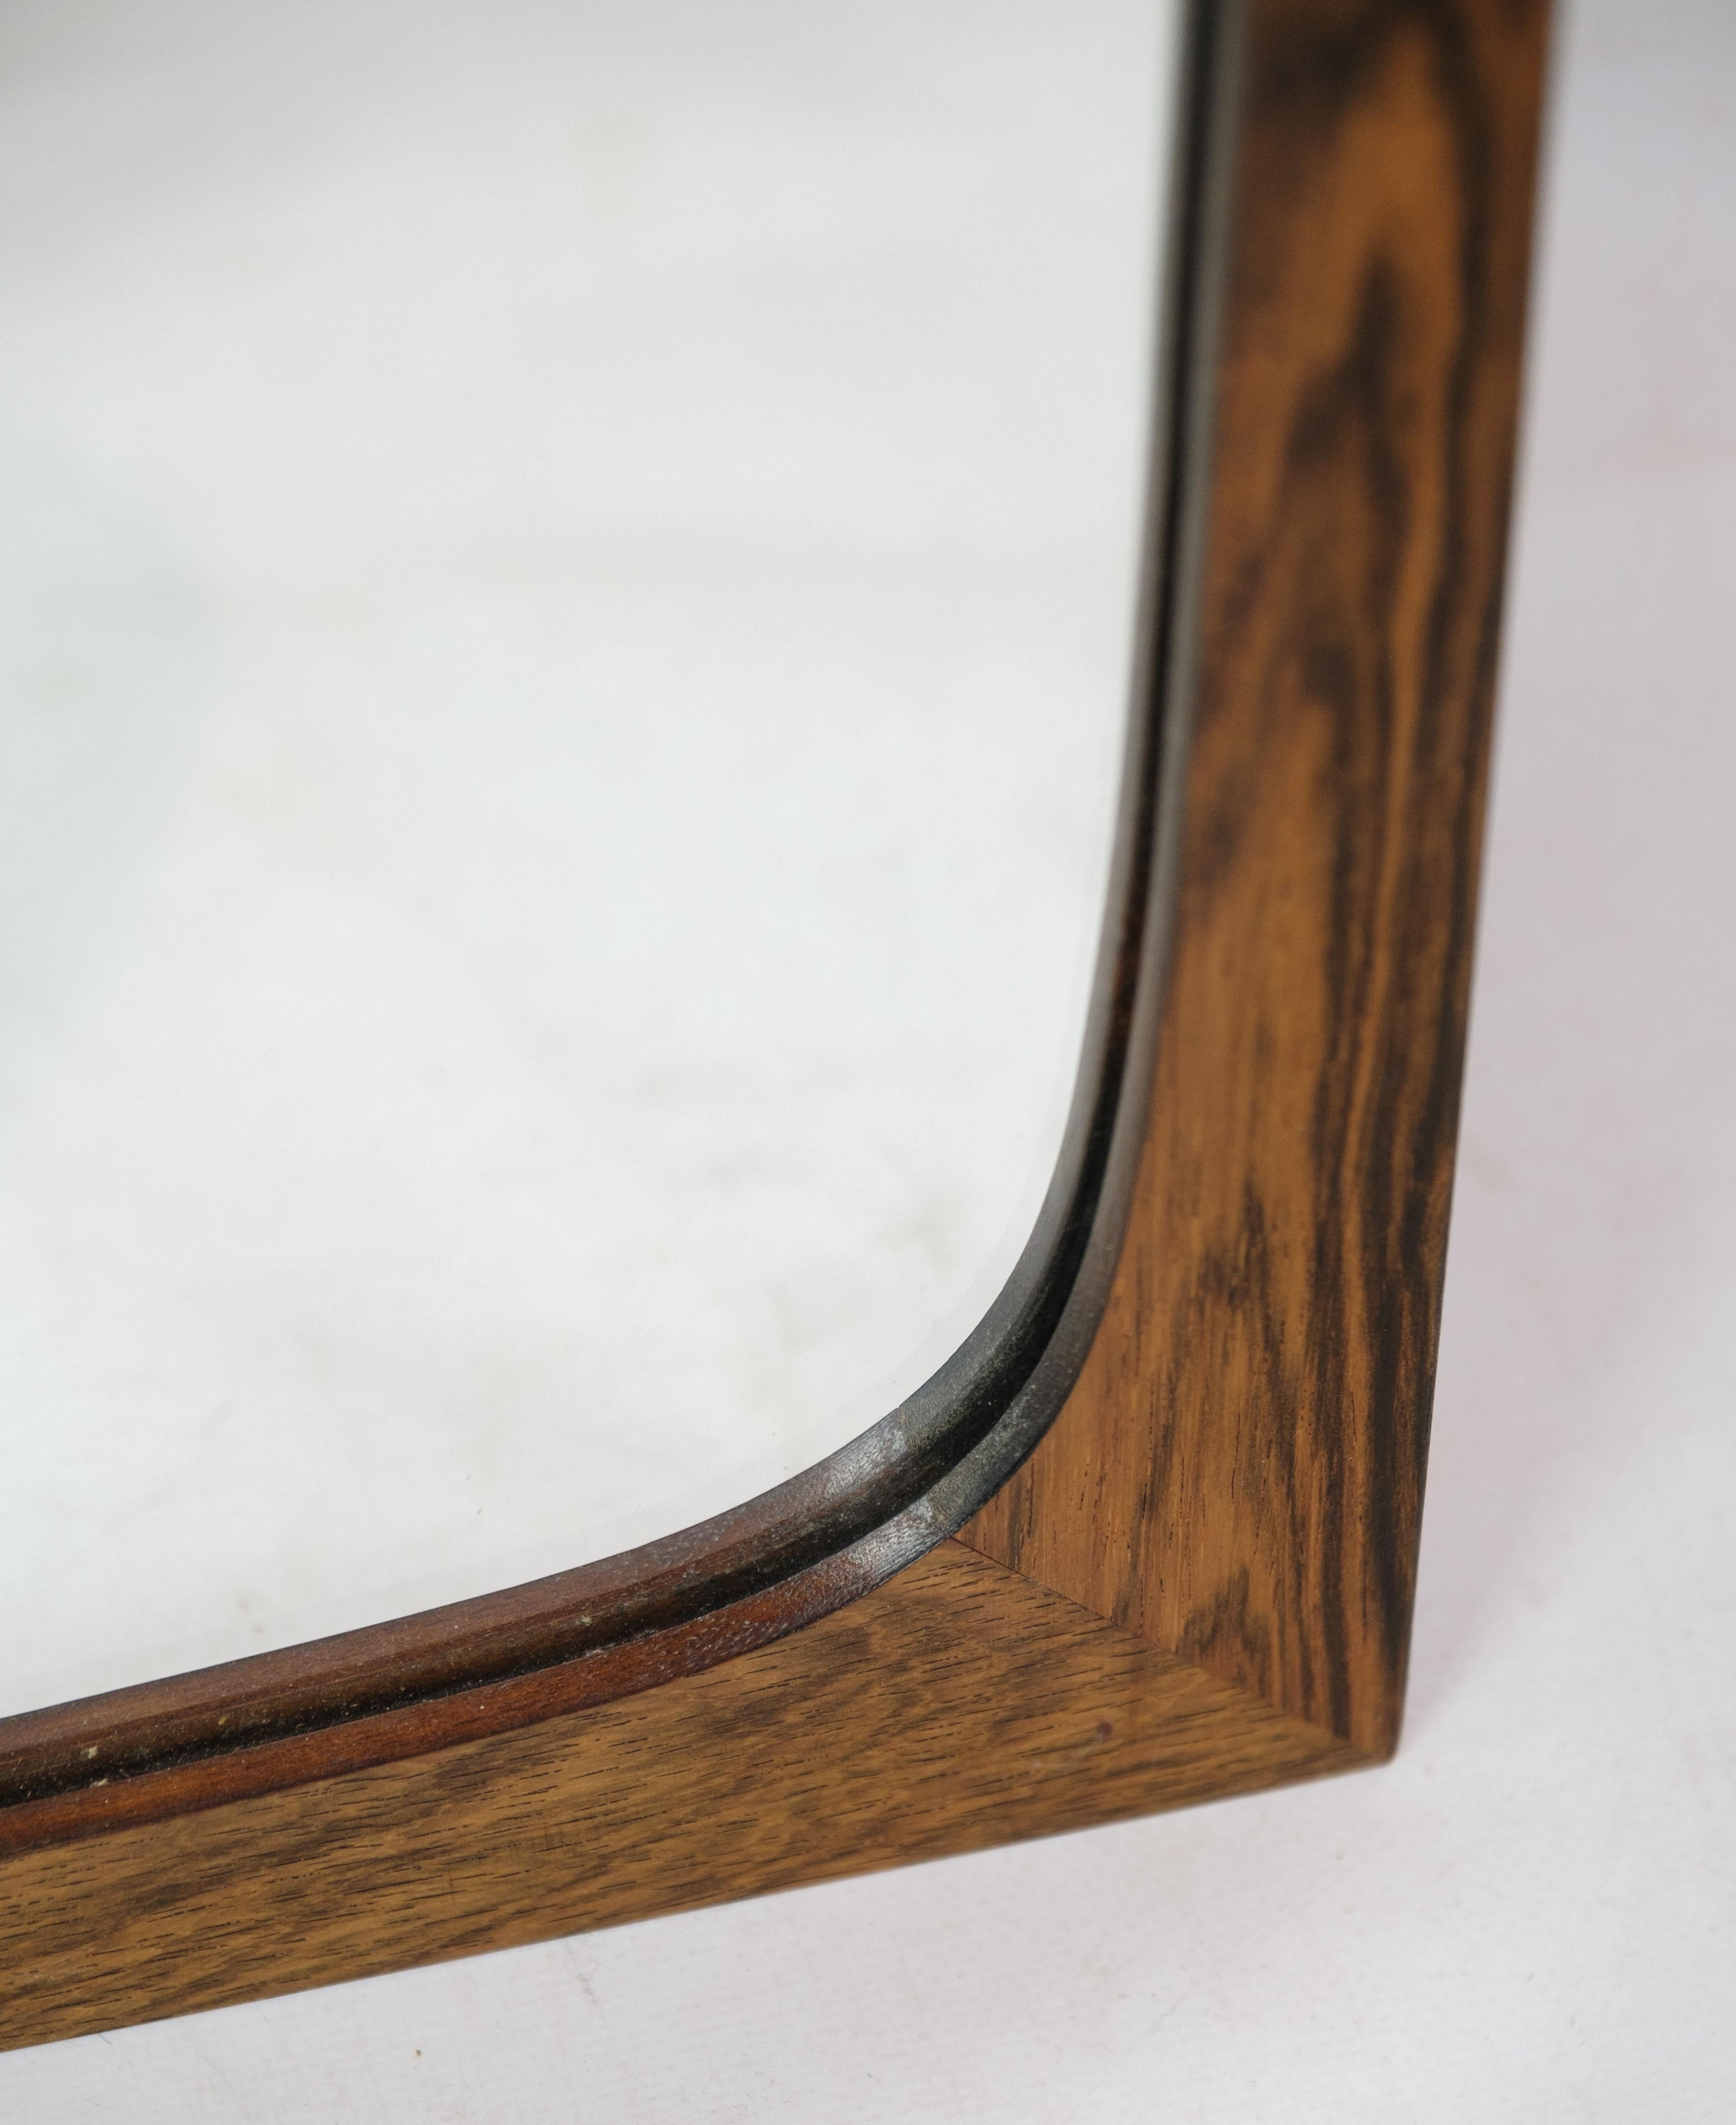 Elongated mirror made of rosewood of Danish design from around the 1960s.
Dimensions in cm: H:97 W:42.
Great condition

This product will be inspected thoroughly at our professional workshop by our educated employees, who assure the product